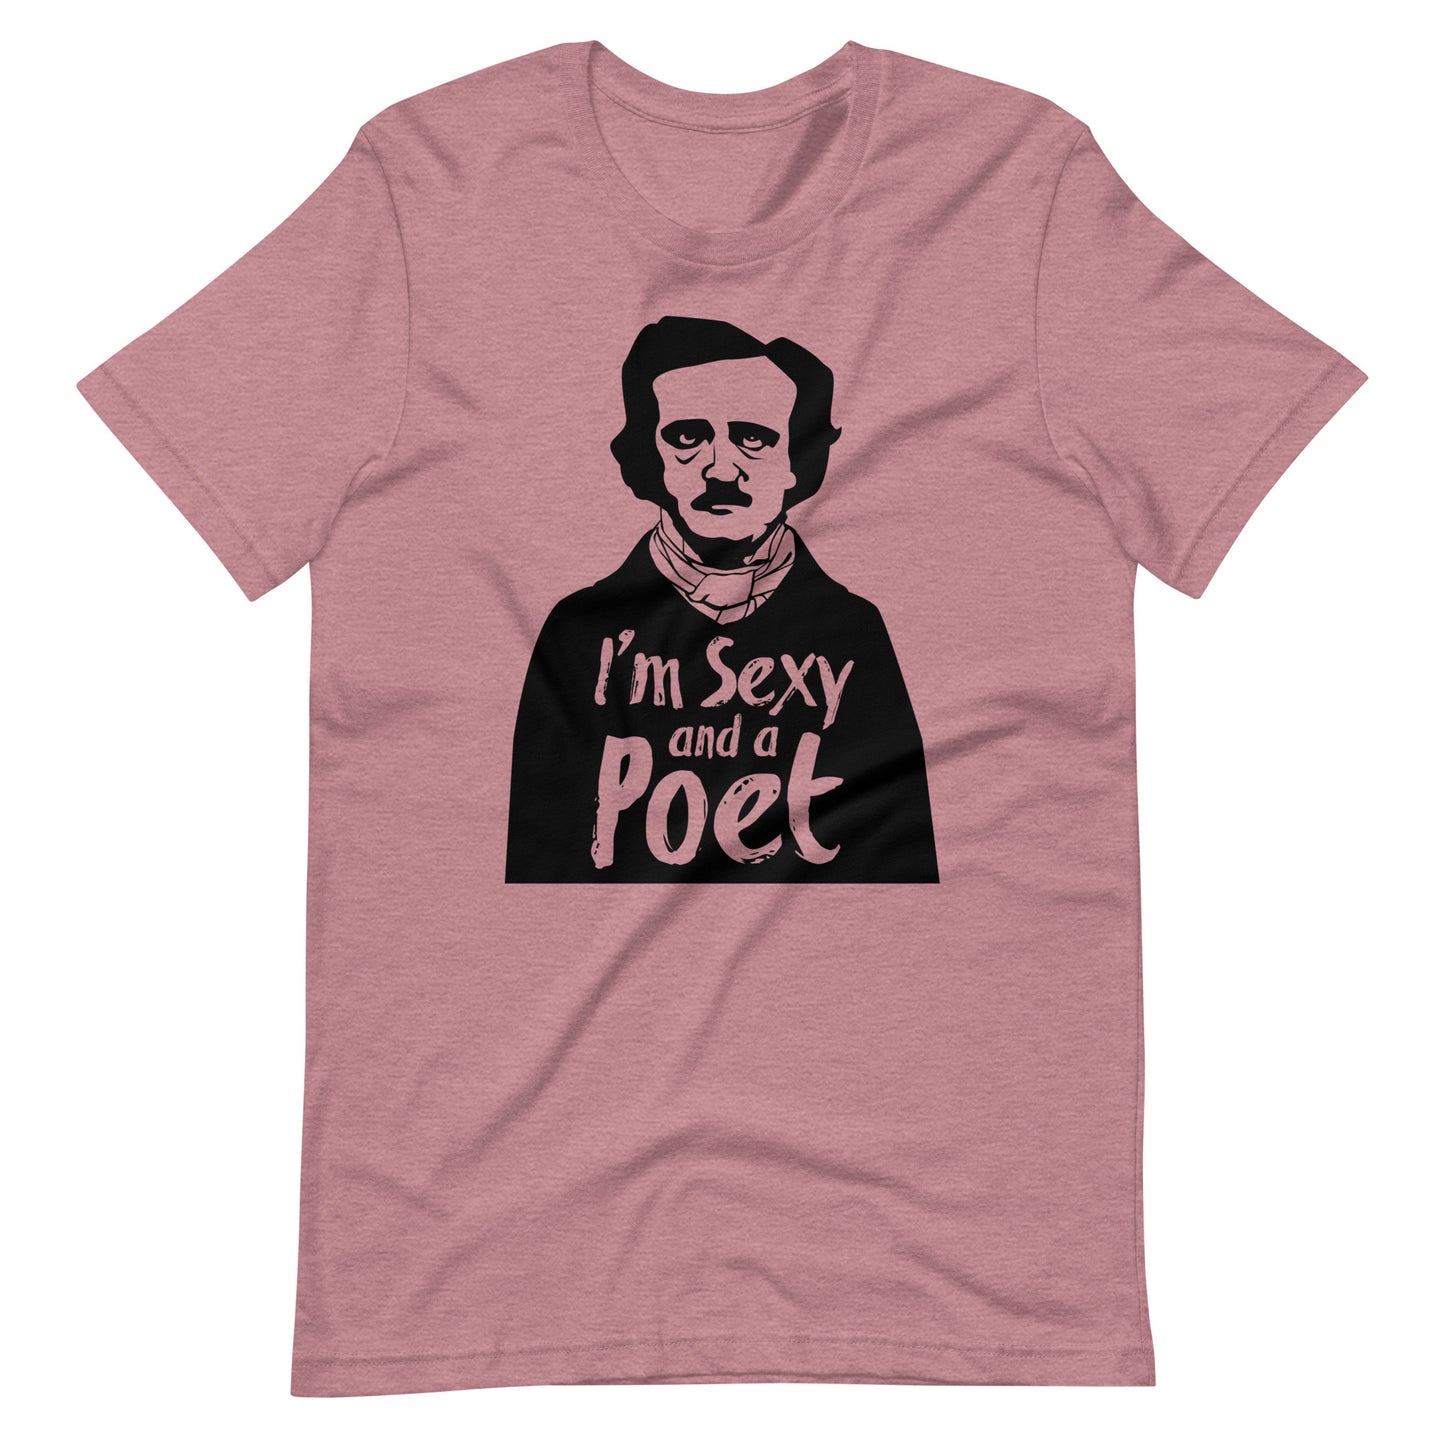 Women's Edgar Allan Poe "I'm Sexy and a Poet" t-shirt - Heather Orchid Front